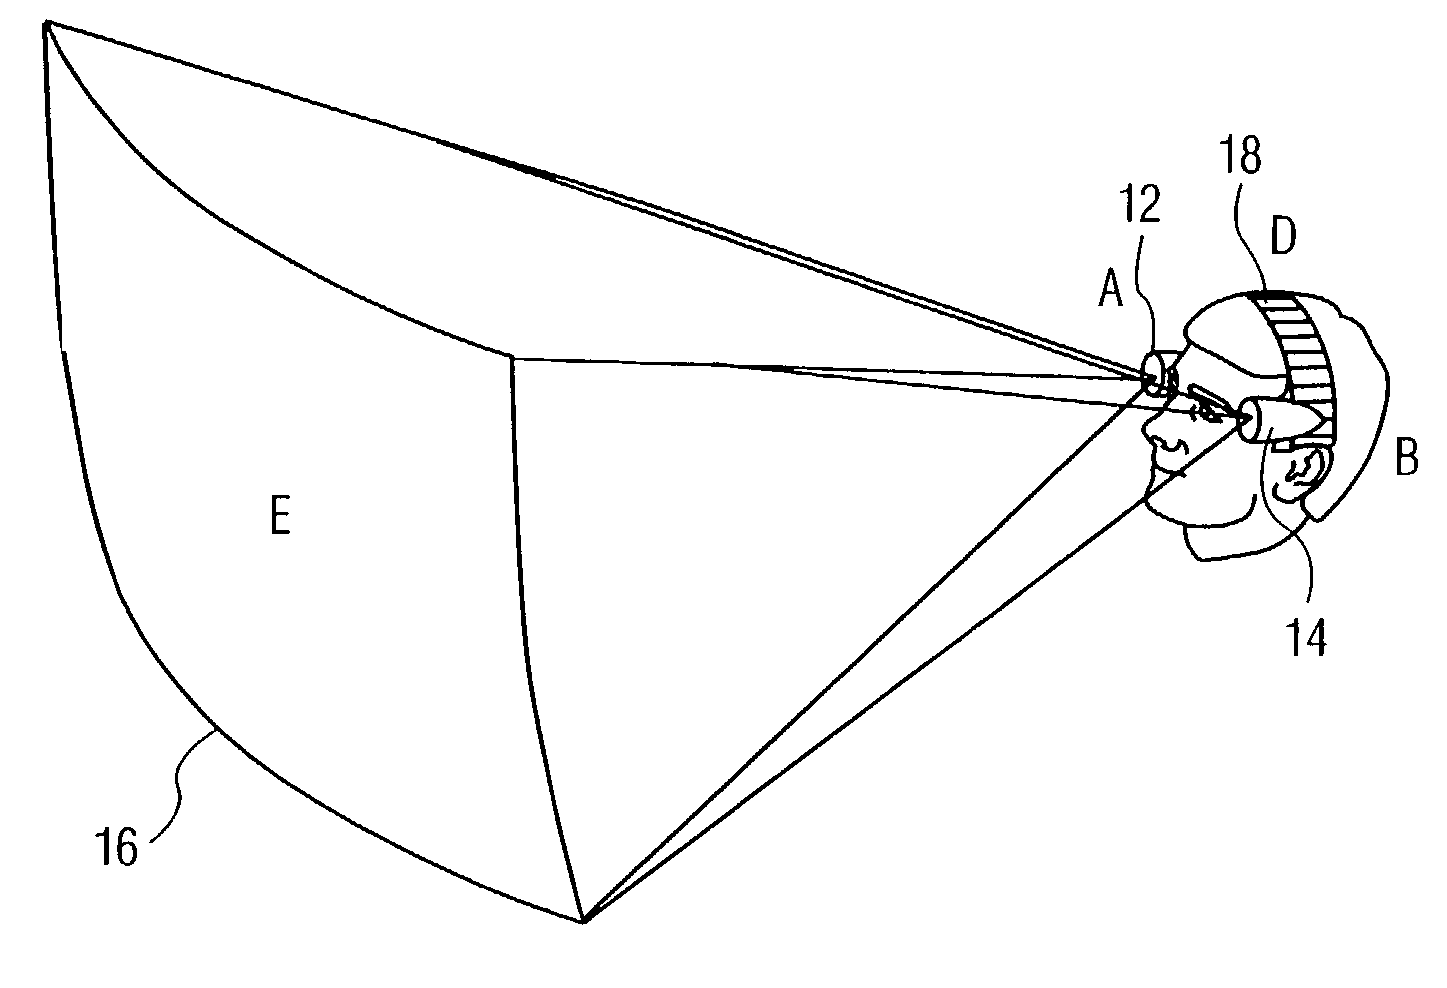 Head-mounted projection display system